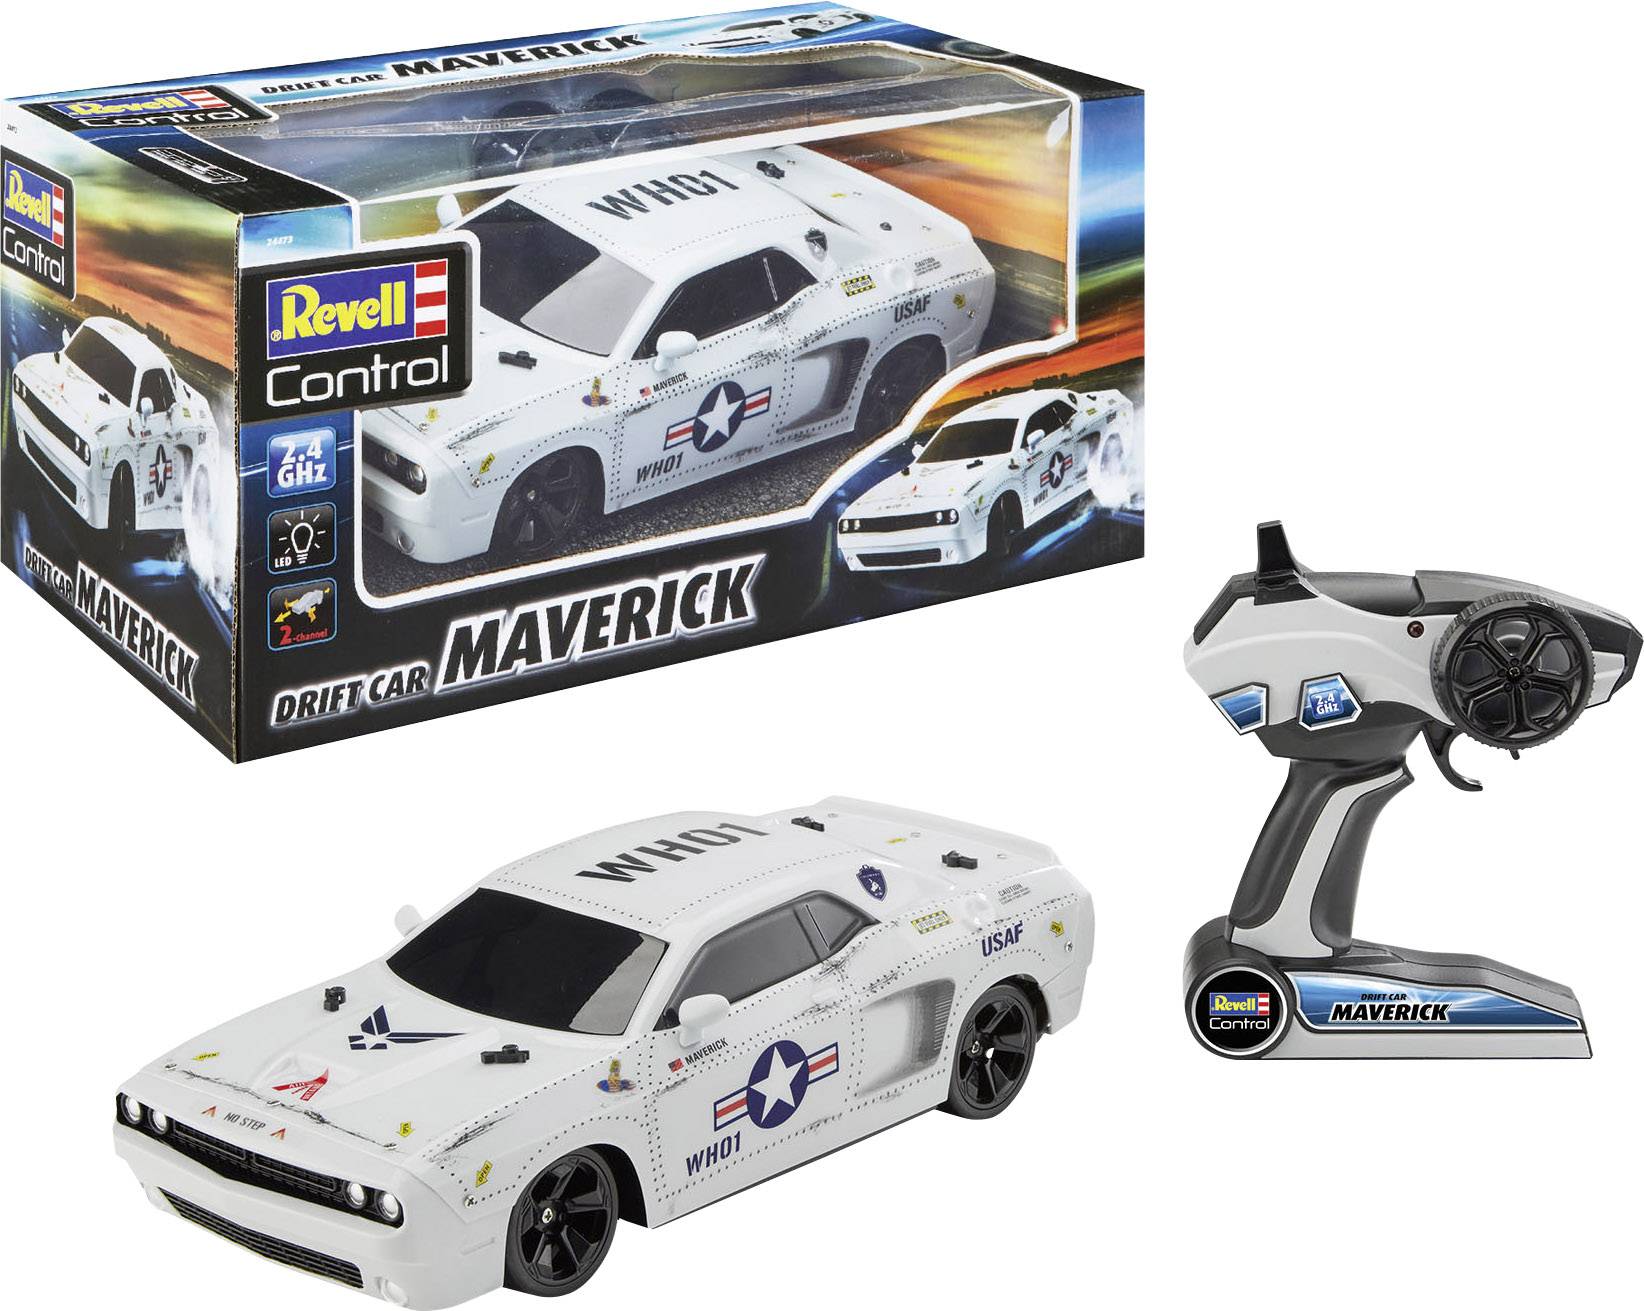 Revell 24473 Maverick 4WD Radio Controlled DRIFT Car RC Car with Battery+Charger 